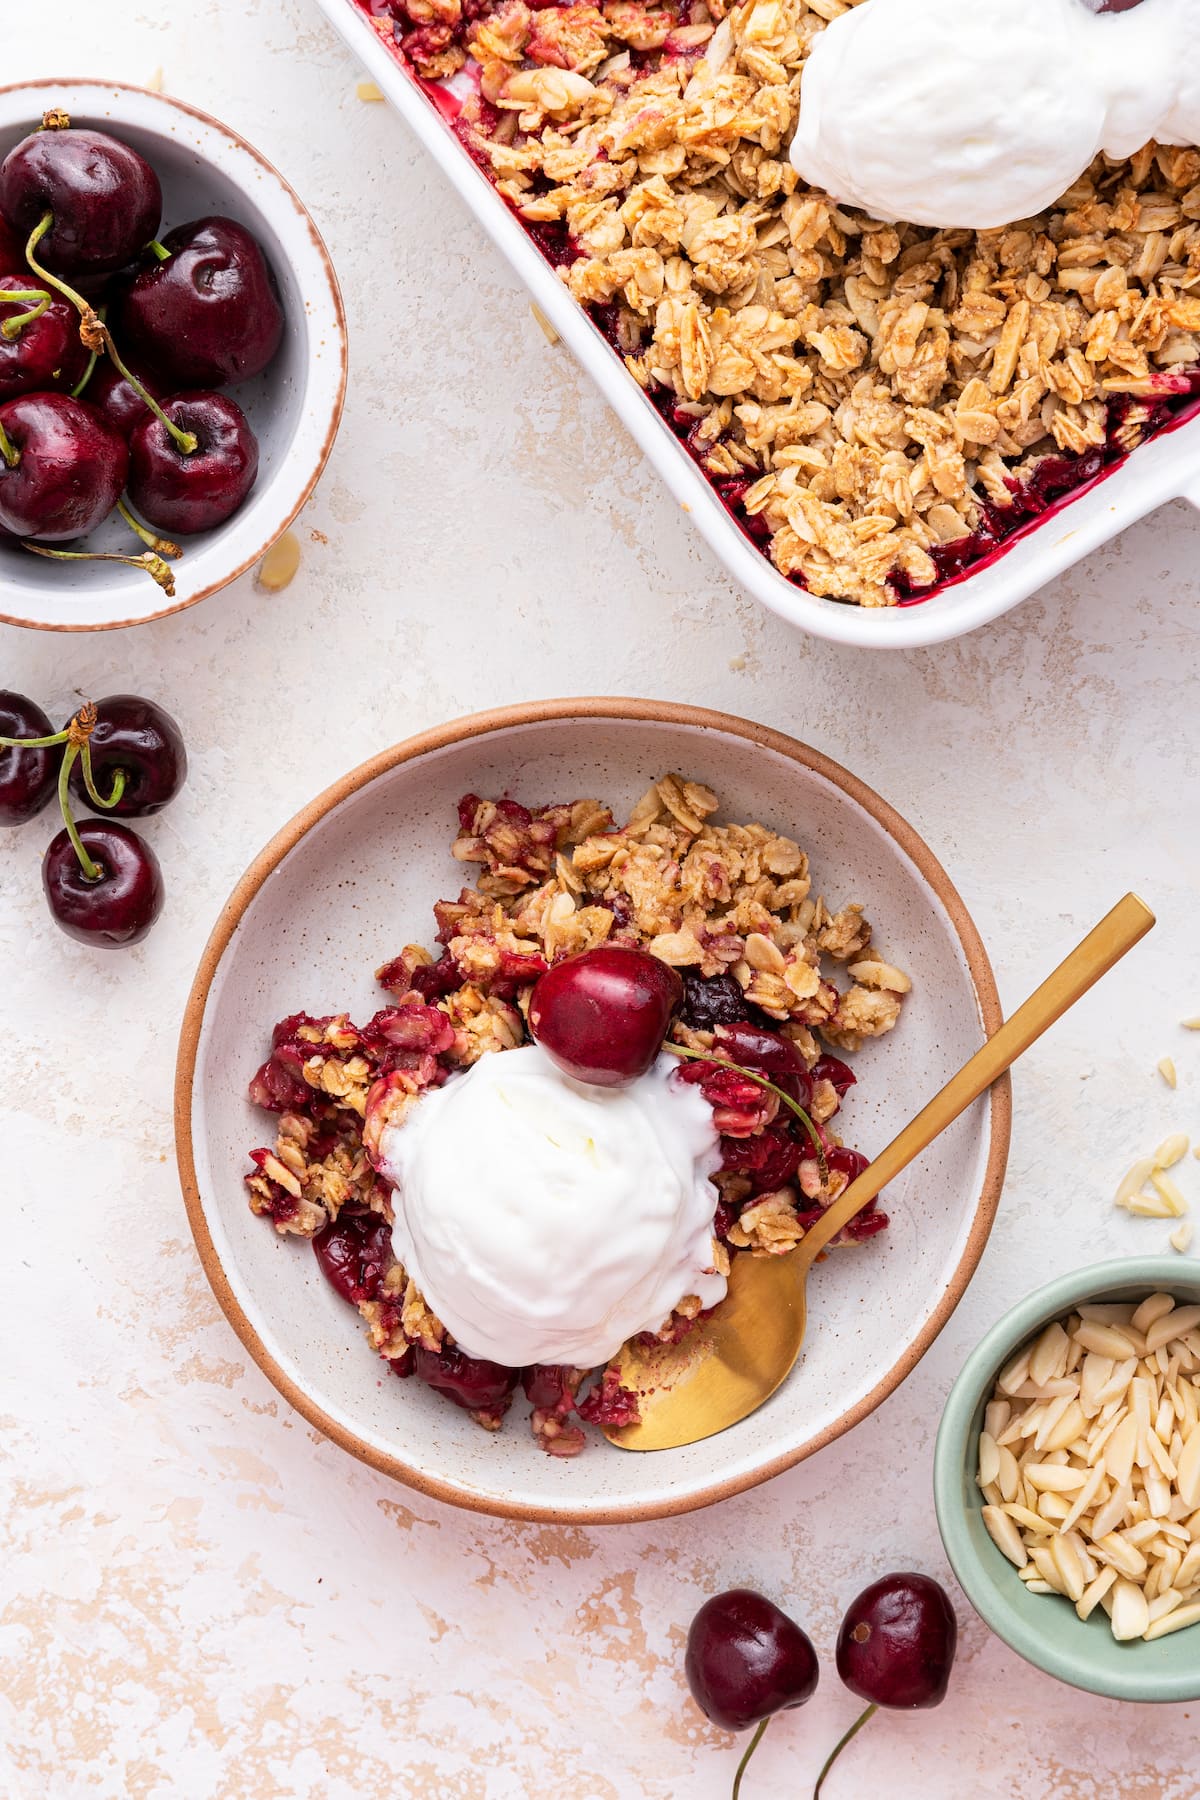 A serving of cherry crisp on a small plate with a metal spoon, a scoop of vanilla ice cream, and a cherry on top.